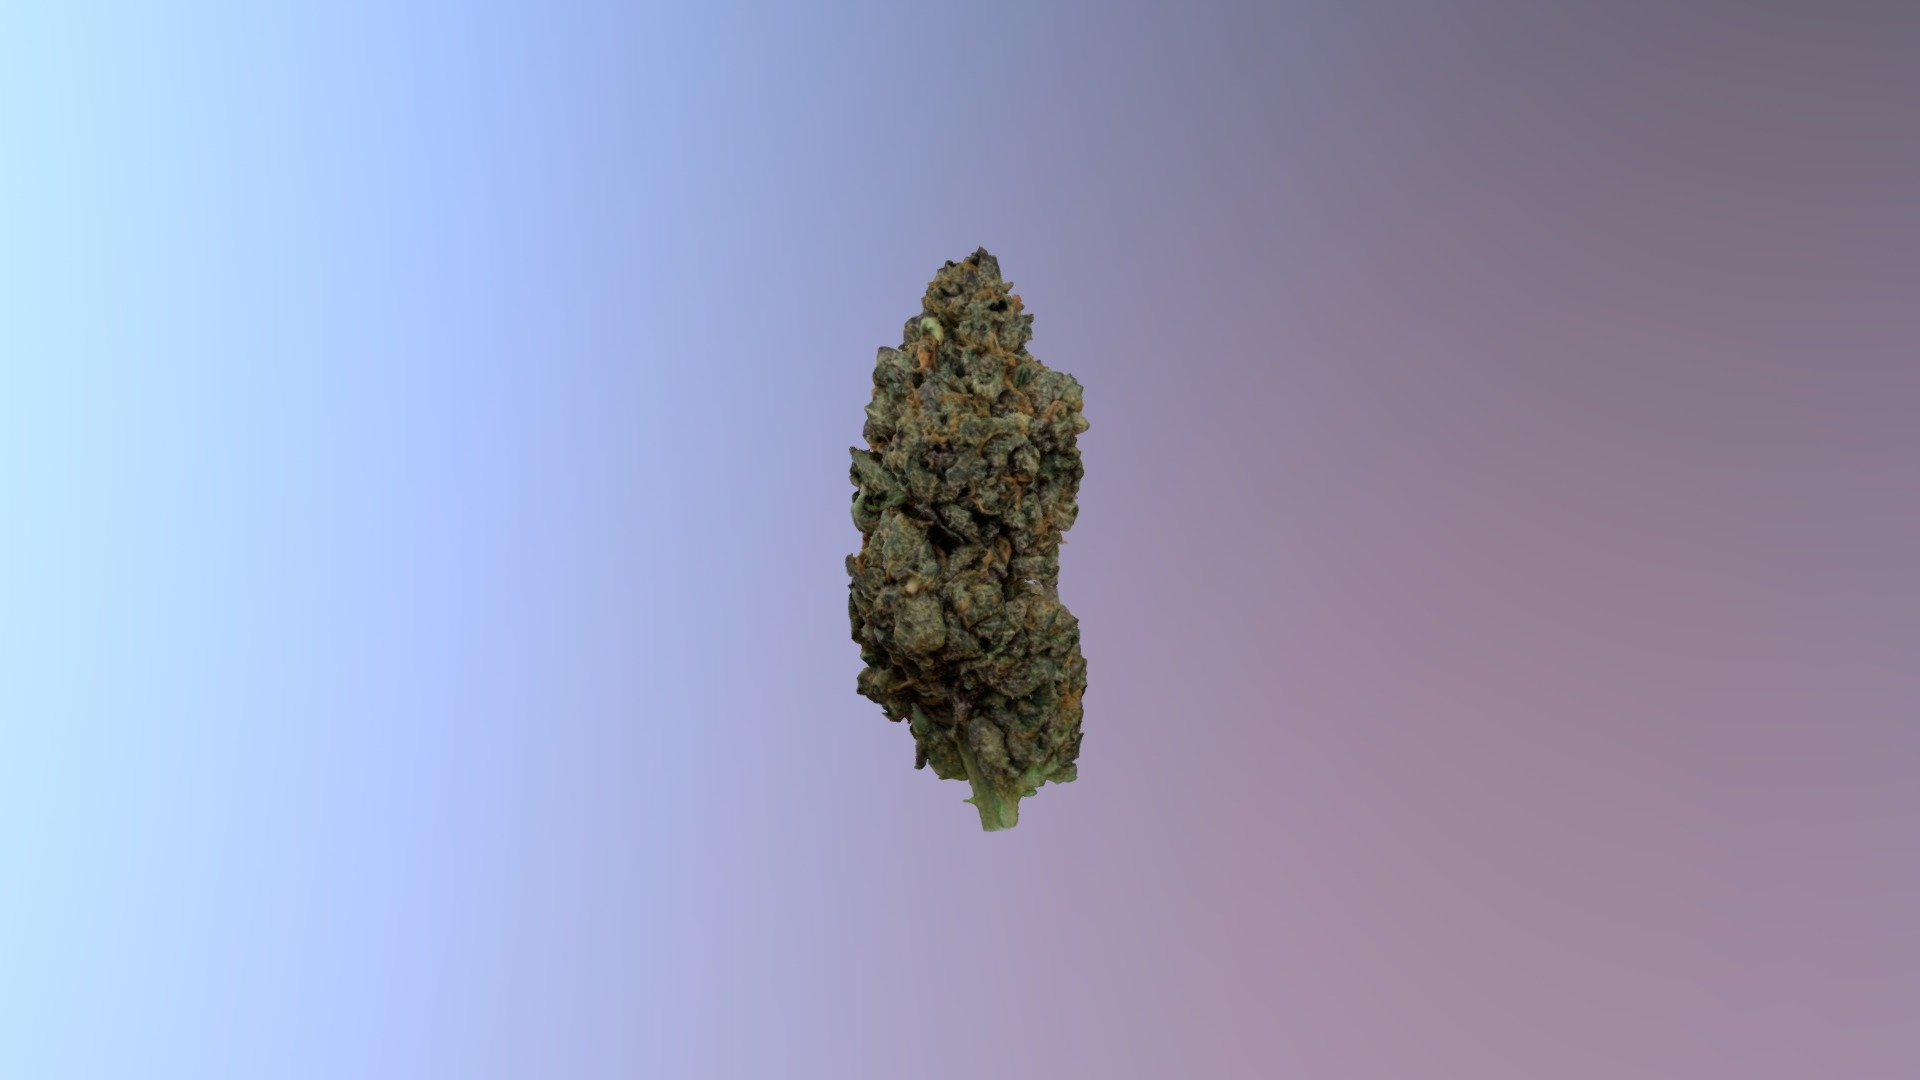 Top Shelf herb. 

Created with RealityCapture 3d model